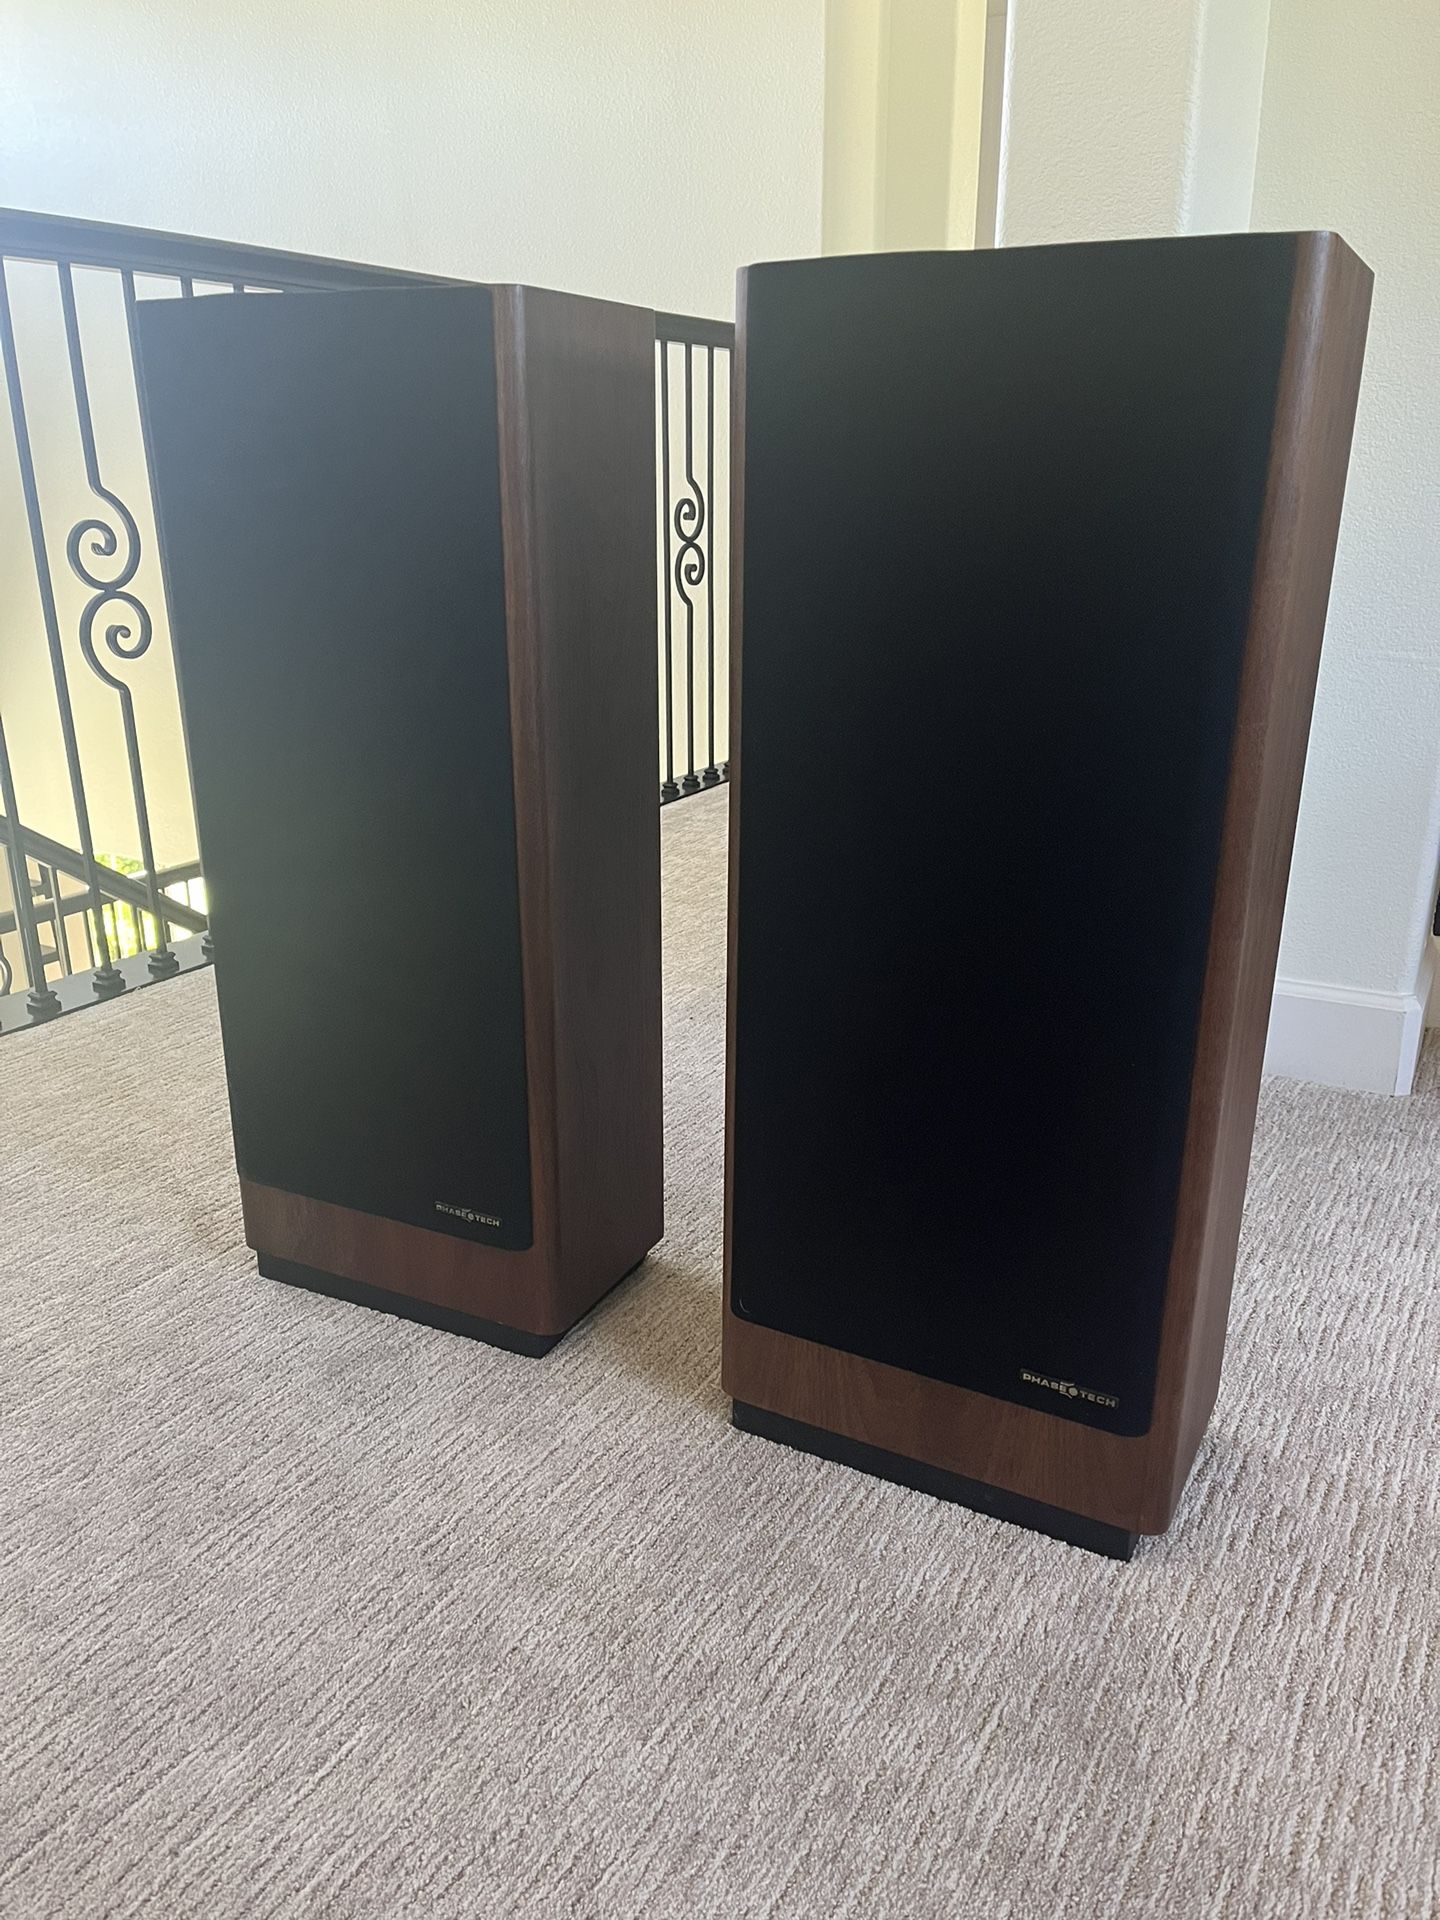 Phase Tech PC800HO Speakers